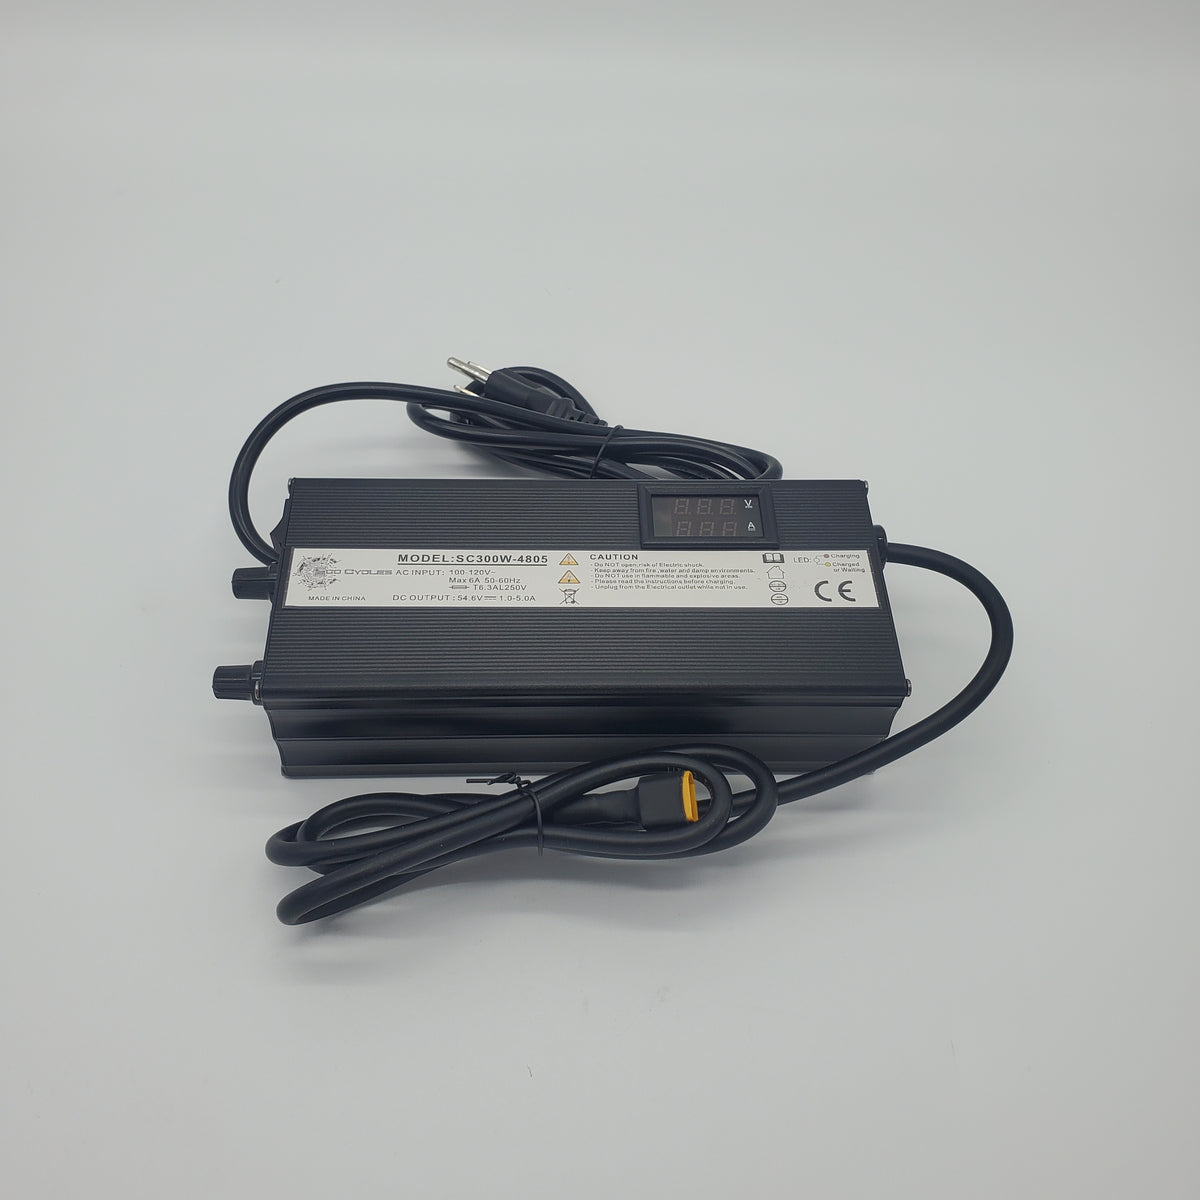 48v Advanced 300w Eco Charger - 1 to 5A - 80/90/100% - w/ Optional Adapters for Universal Use